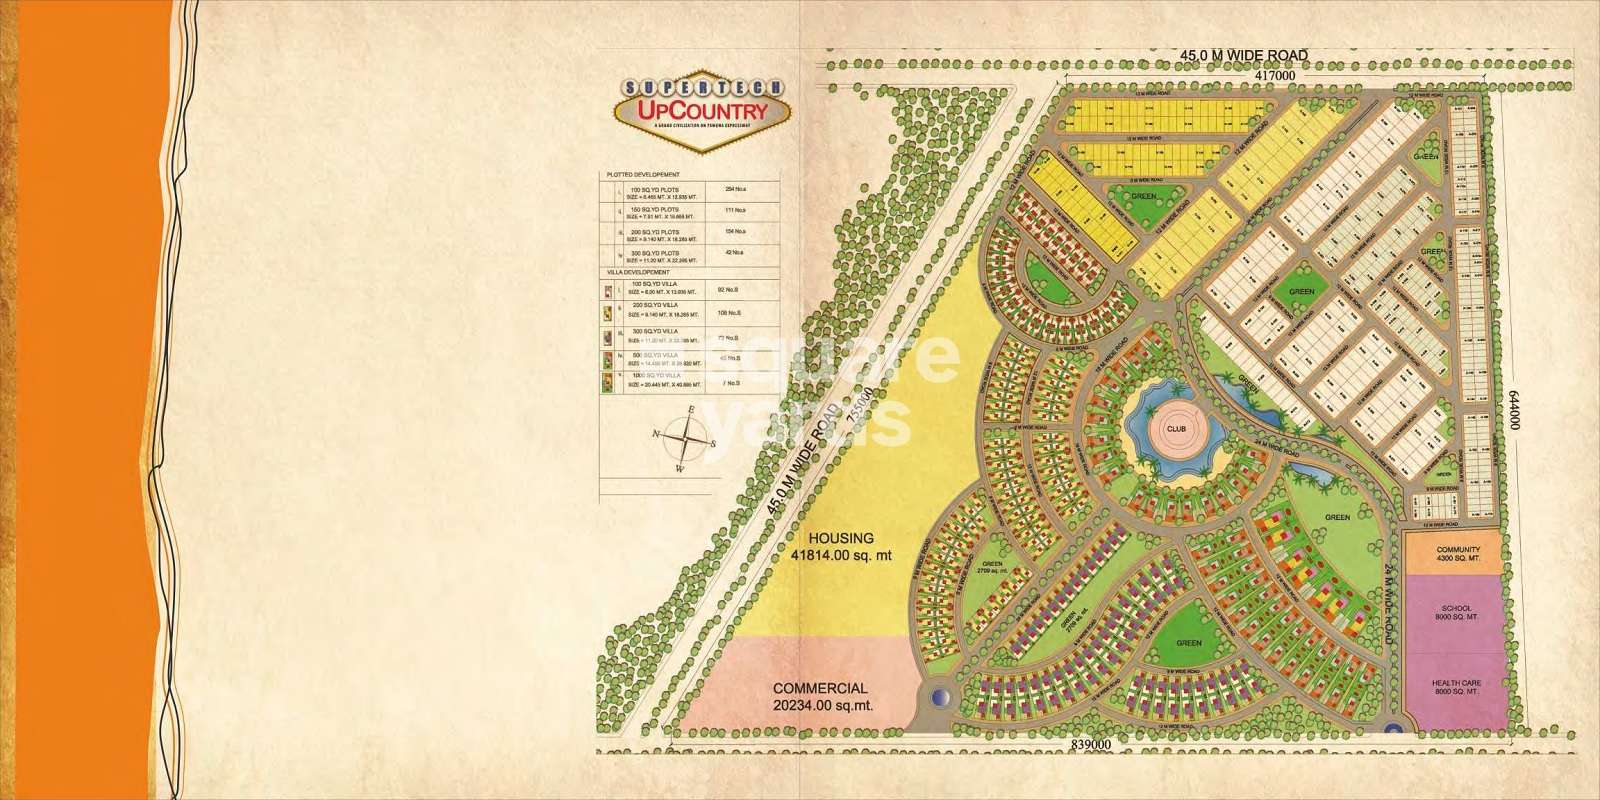 supertech up country project master plan image1